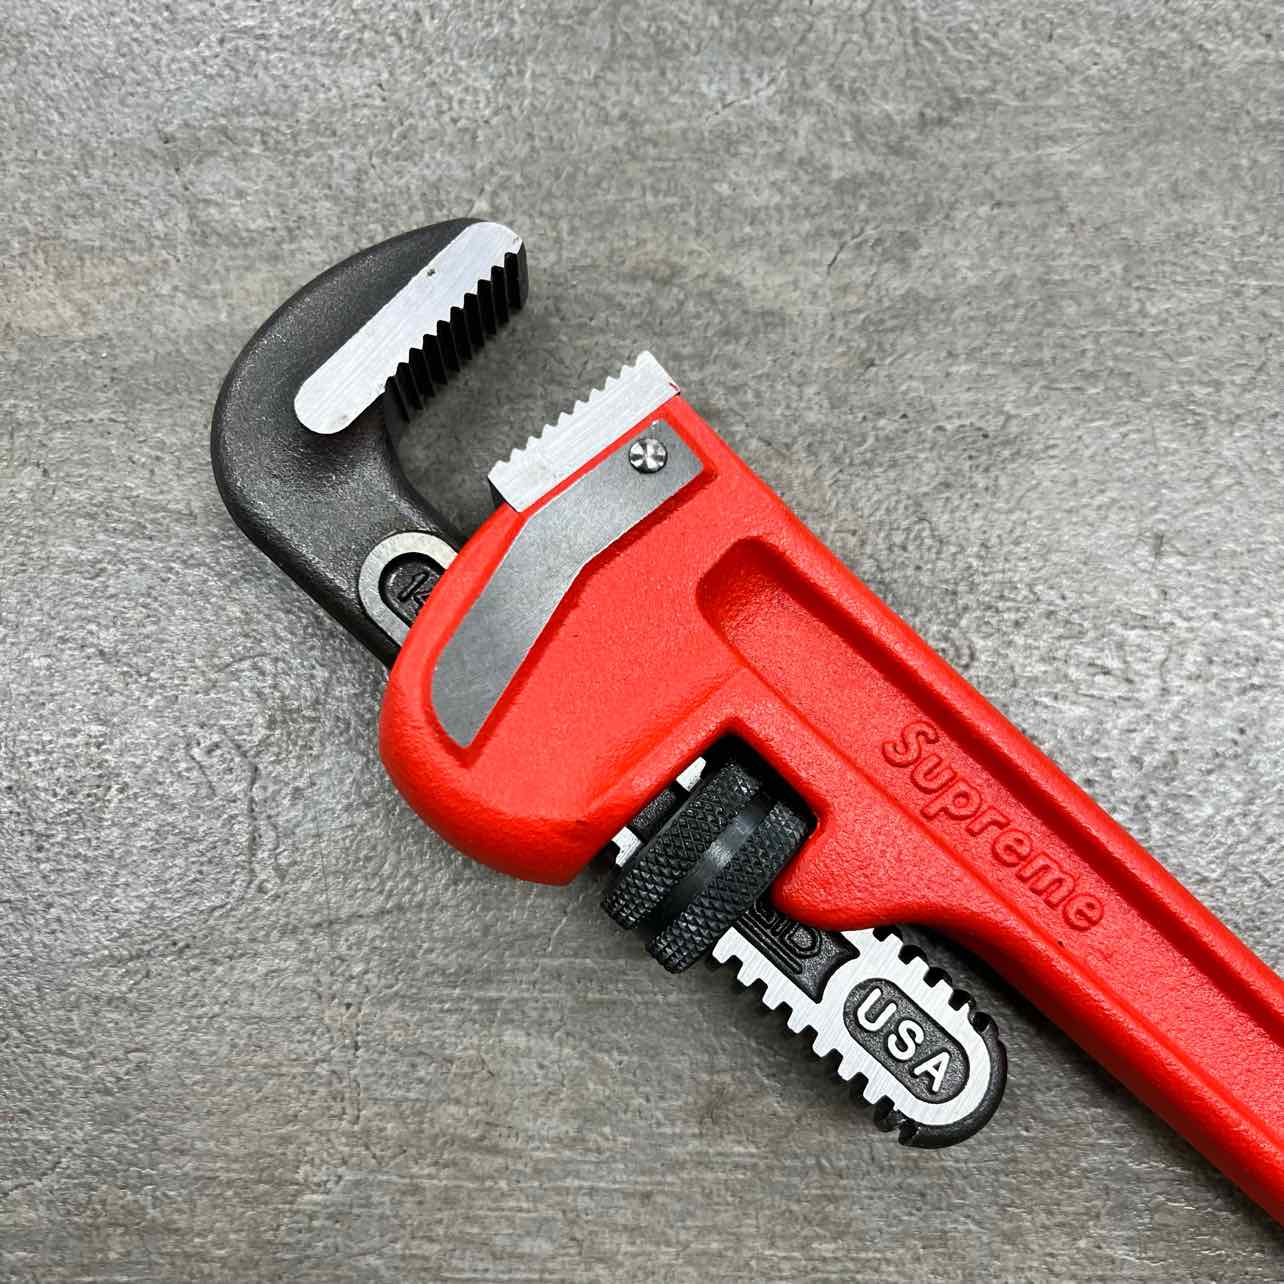 Supreme Pipe Wrench "RIDGID" 2020 New Red